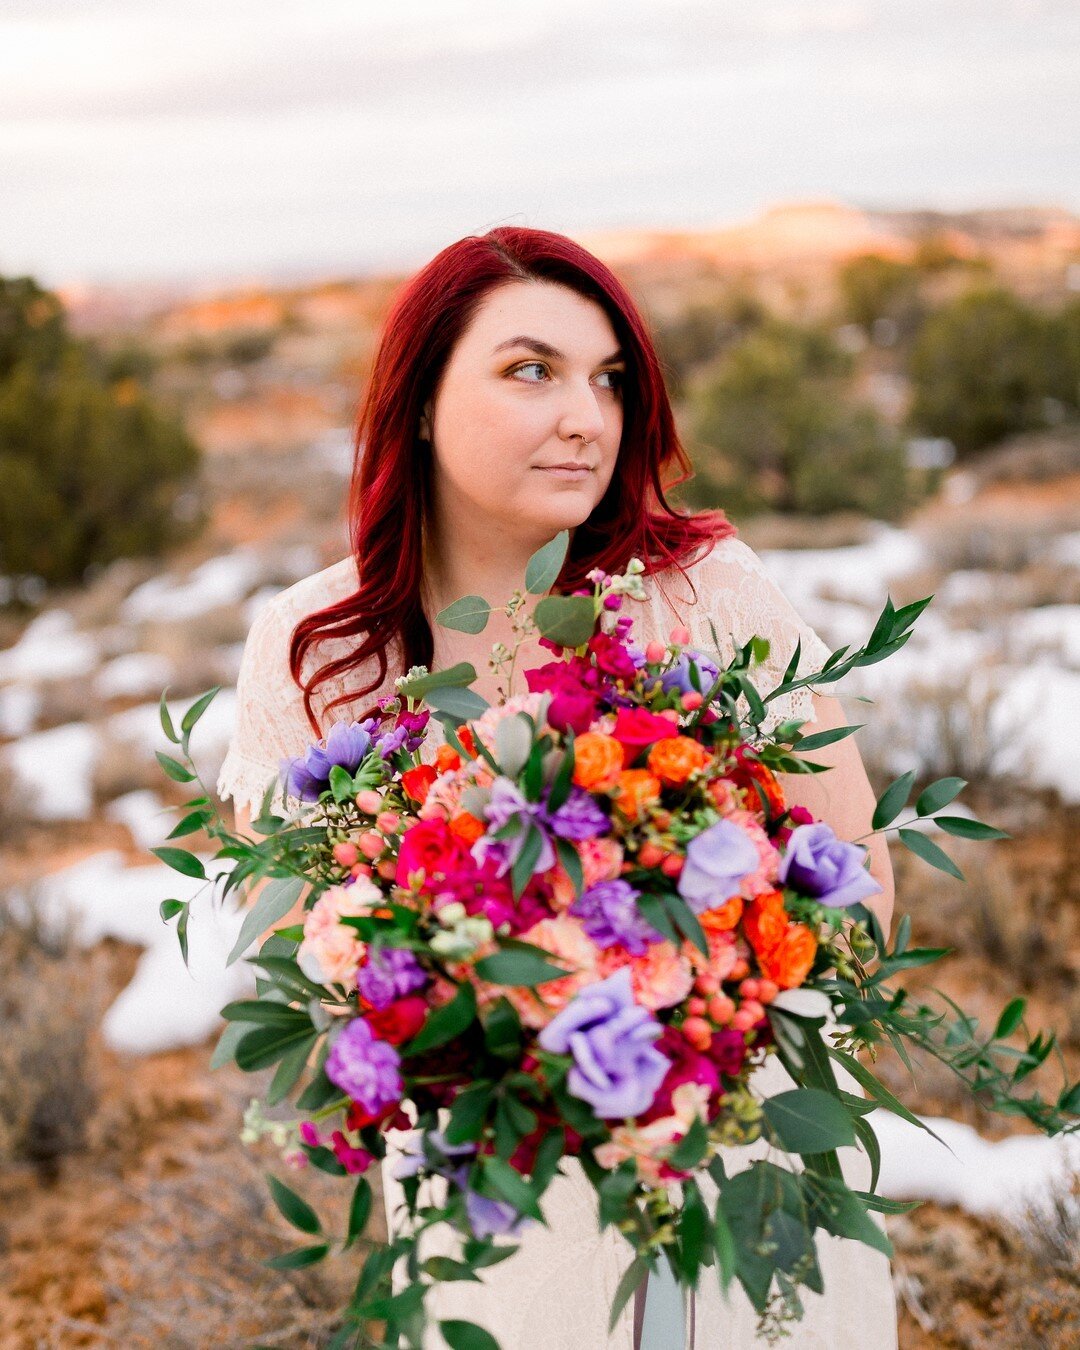 I love how perfectly the gorgeous colors in this bouquet match my cute bride&rsquo;s personality 🥰 Everyone has their opinions about weddings and dresses and flowers, but ultimately it&rsquo;s YOUR day and it should highlight all the wonderful thing